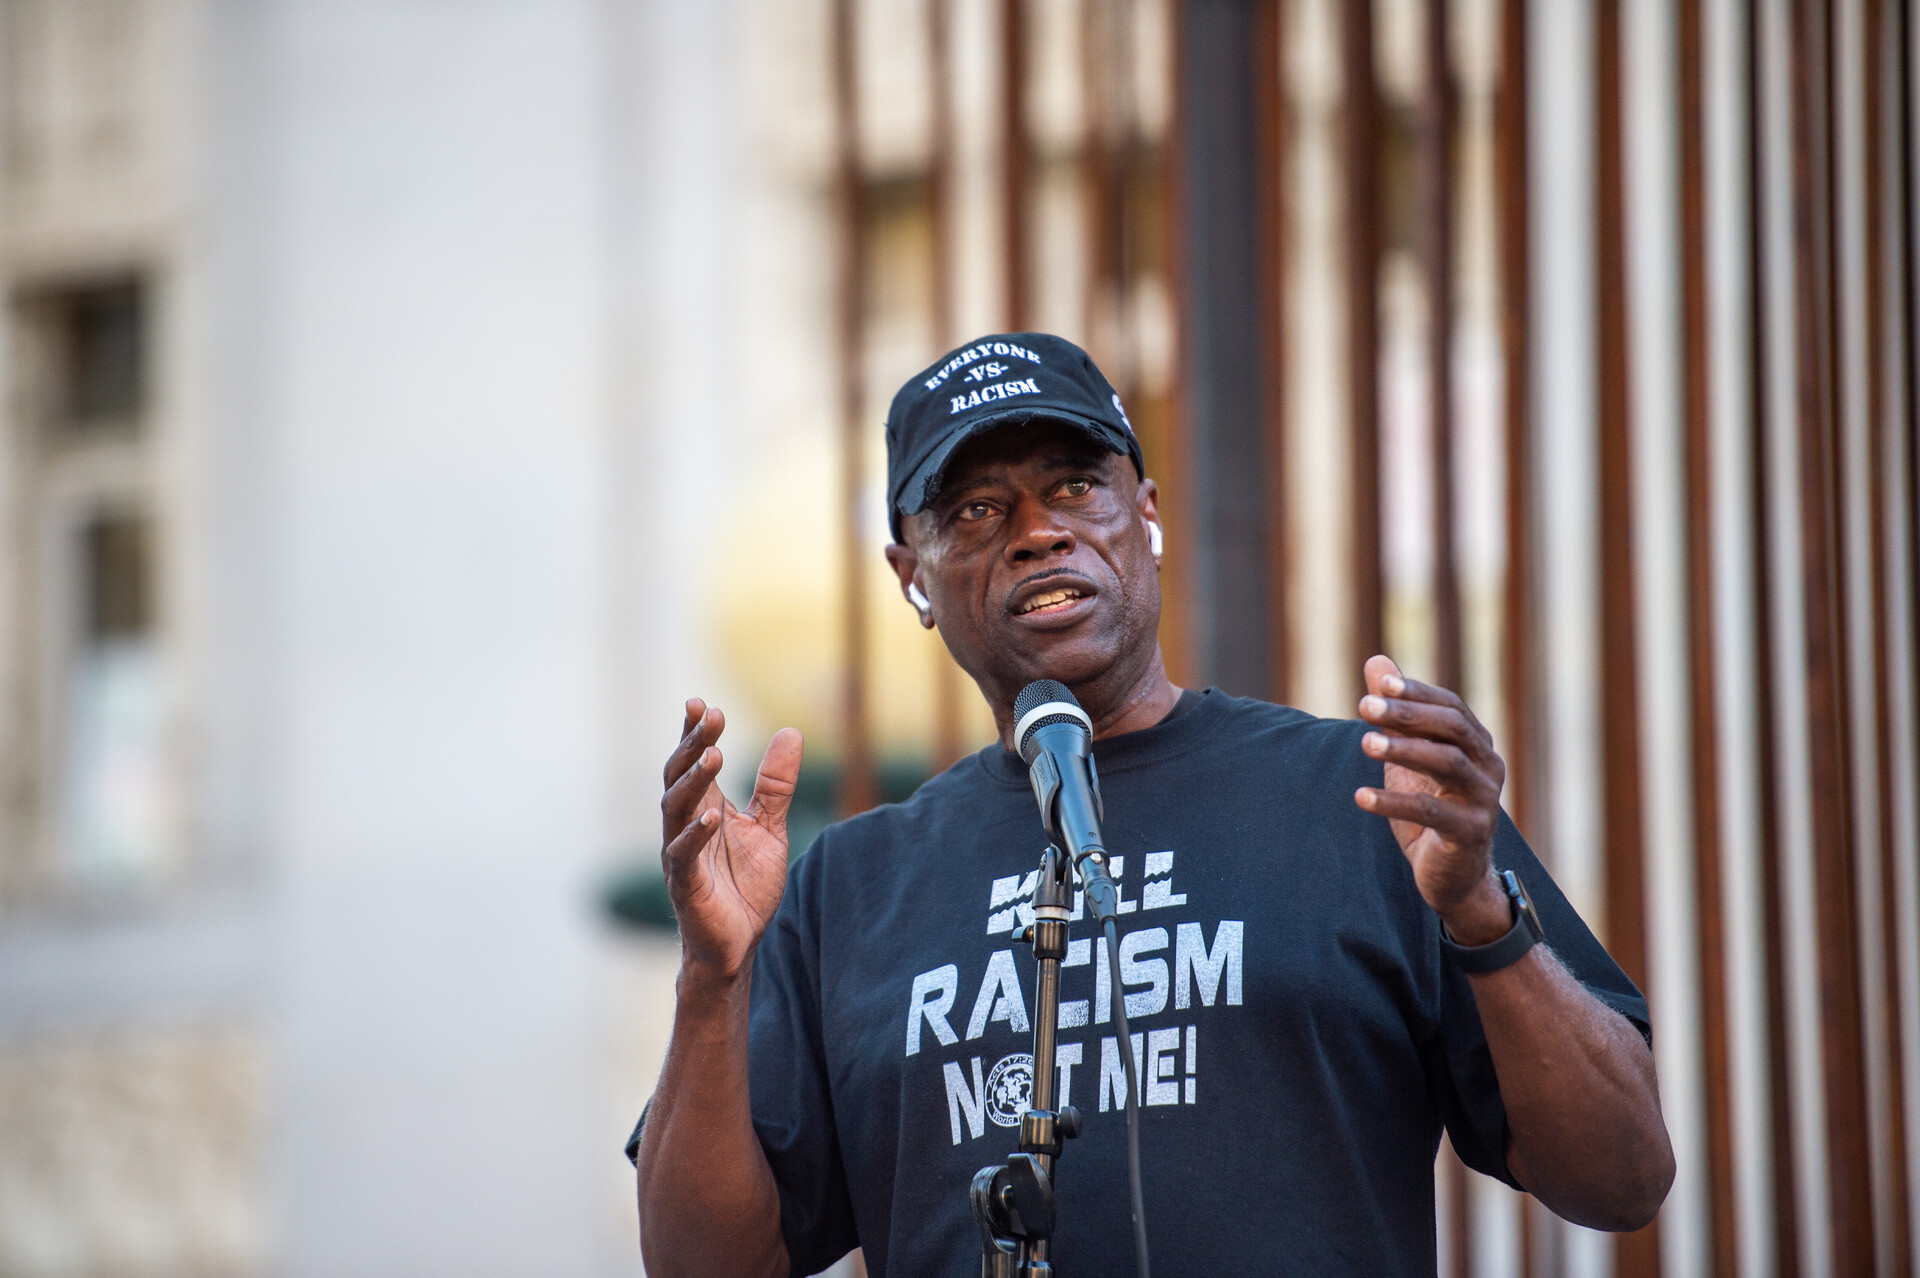 An older Black man speaks at a microphone with a shirt reading 'kill racism not me'